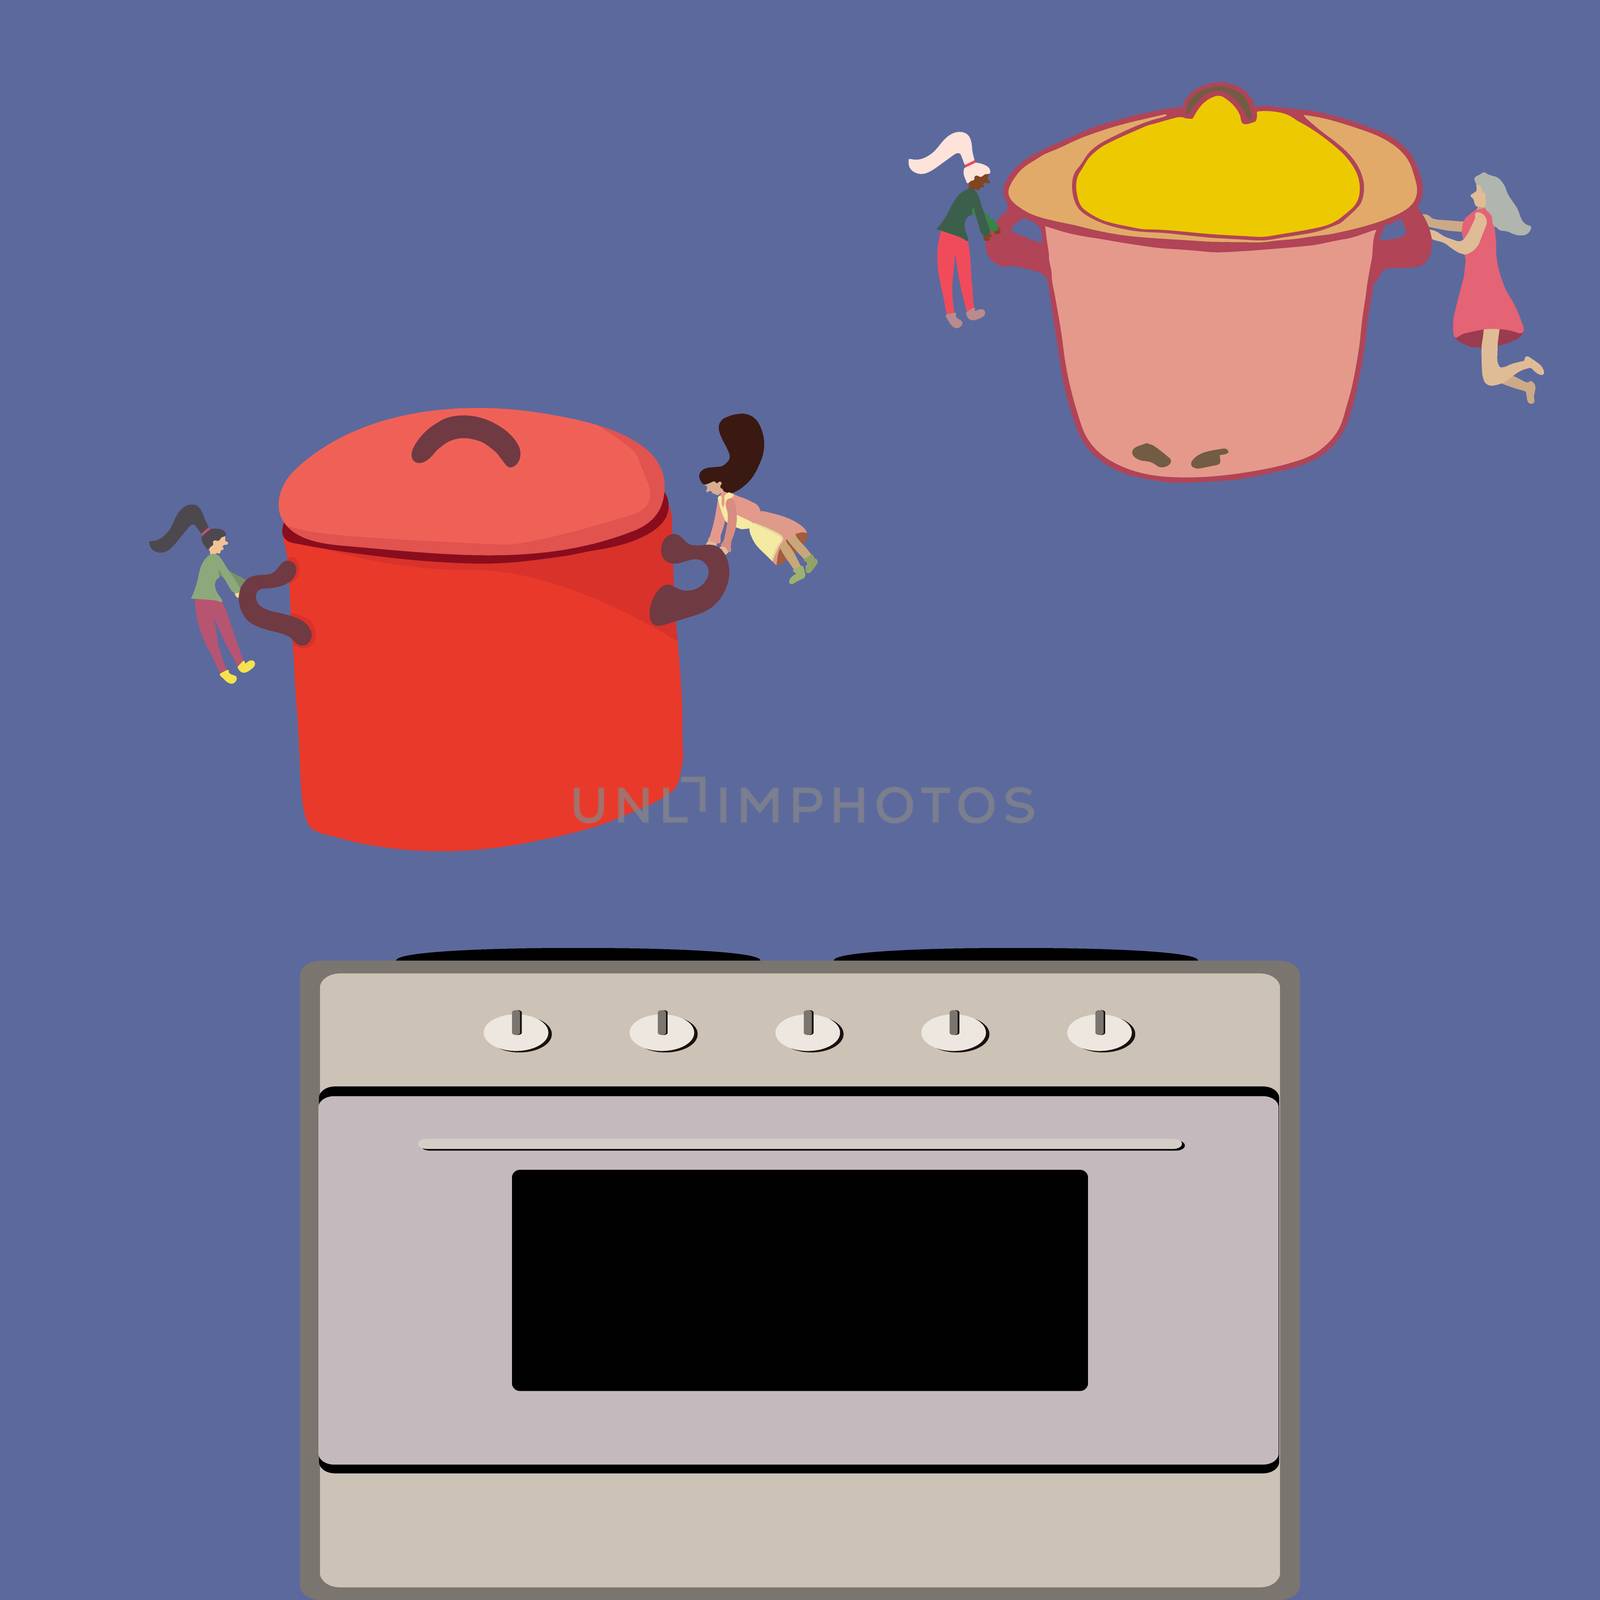 Tiny people holding giant pots. Cute illustration of food preparation. 